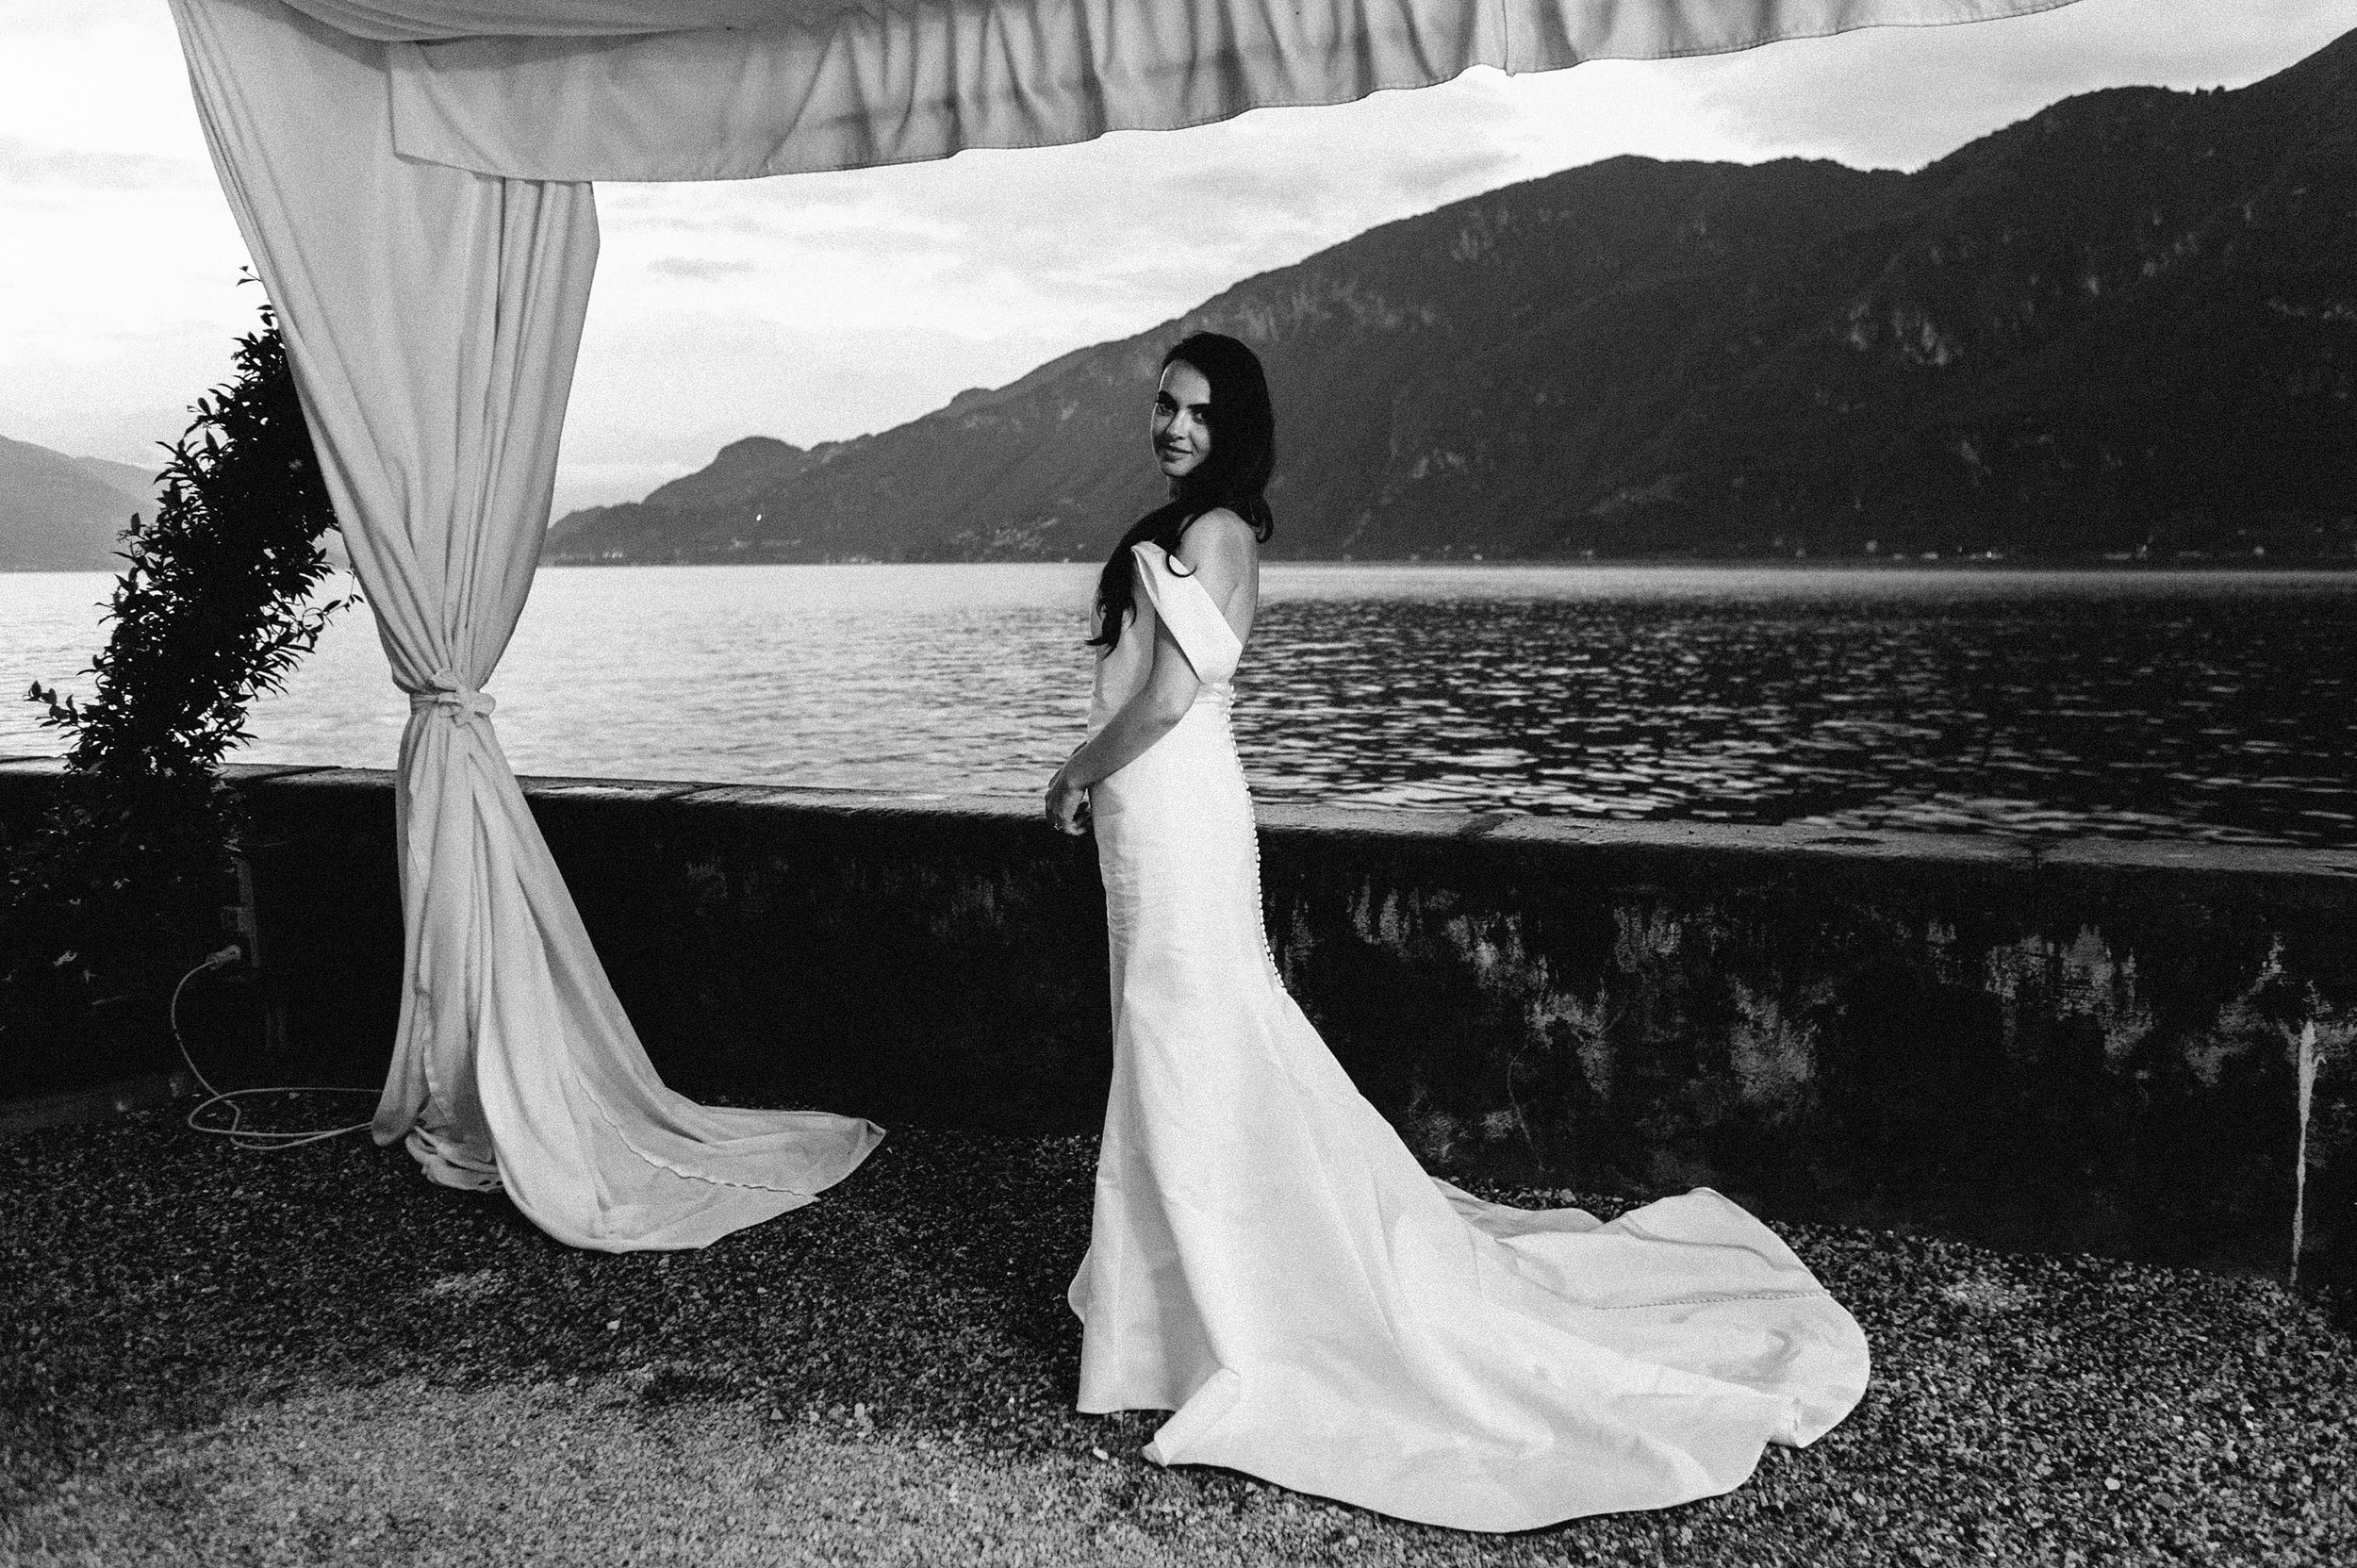 portrait-of-the-bride-and-curtain-lake-como-black-and-white-wedding-photography.jpg